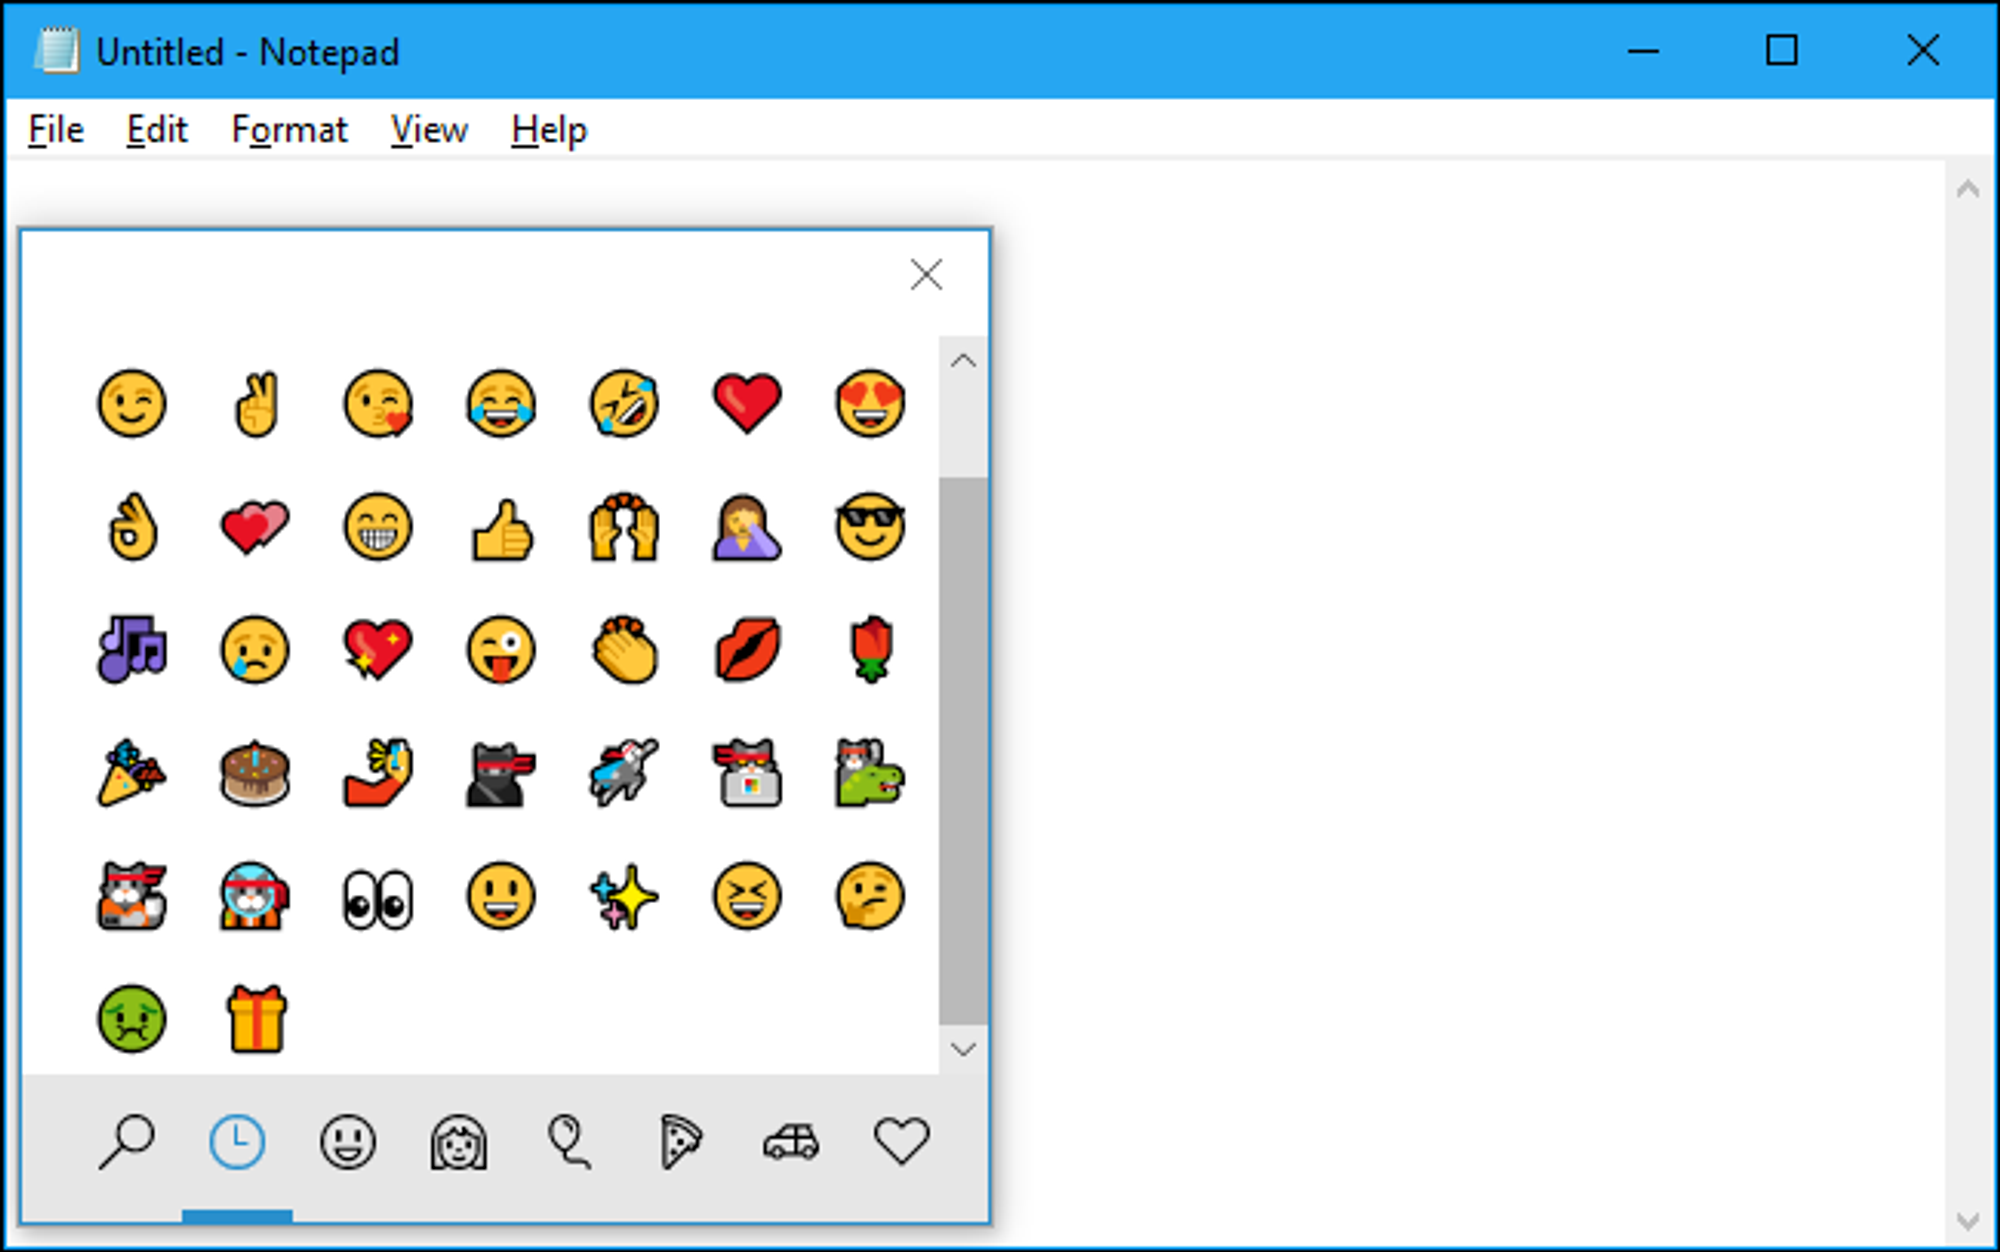 How To Add Emojis To Your Notion Workspace